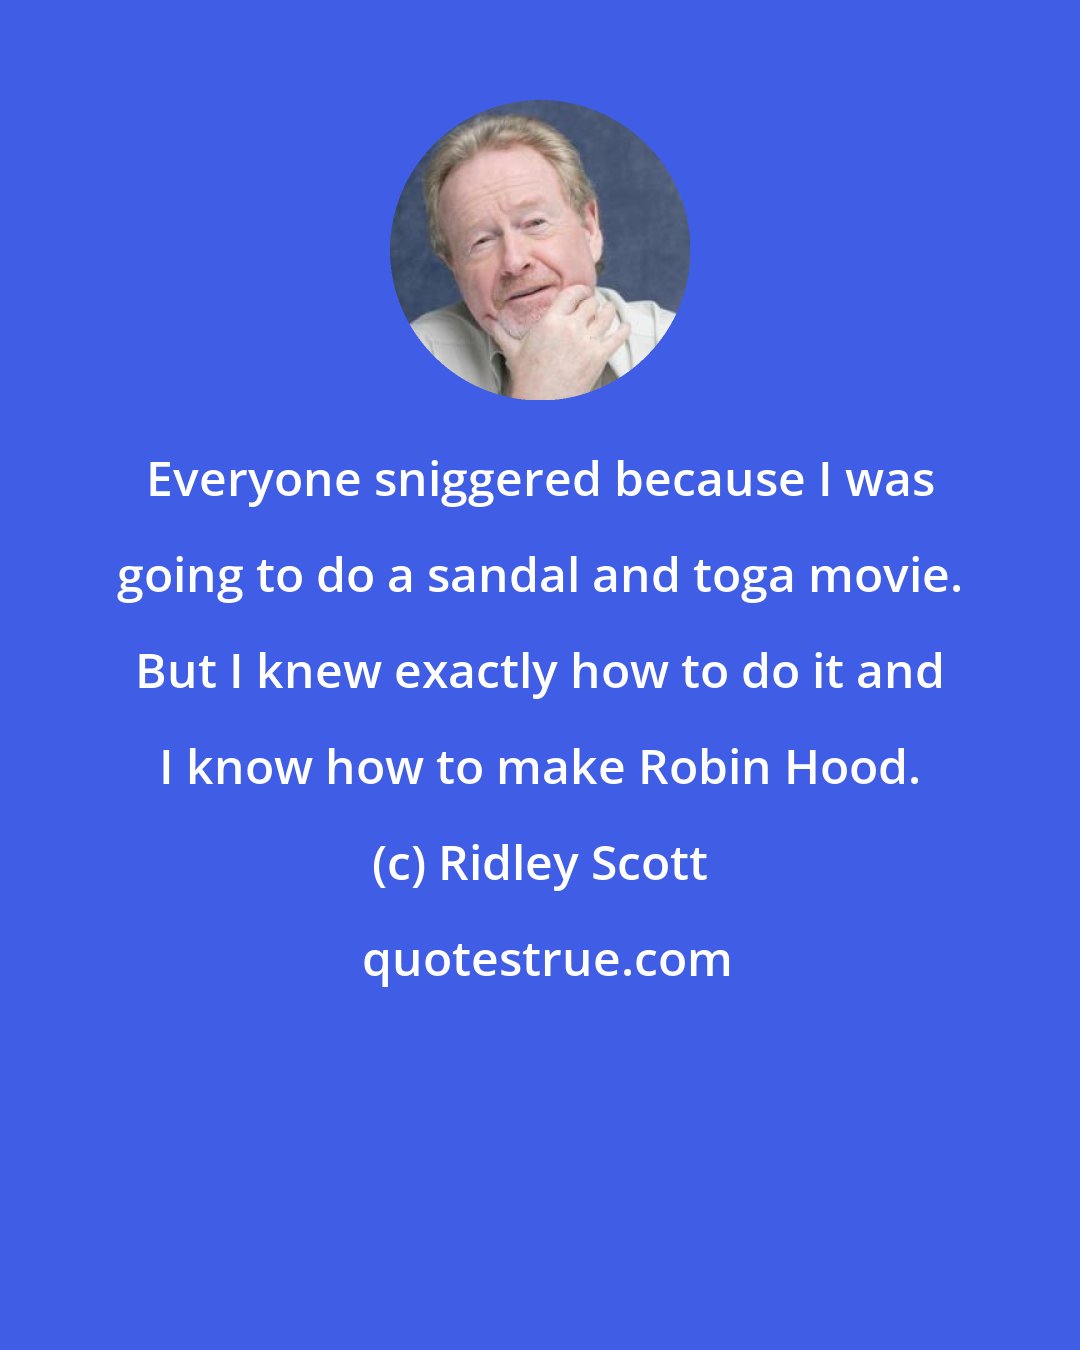 Ridley Scott: Everyone sniggered because I was going to do a sandal and toga movie. But I knew exactly how to do it and I know how to make Robin Hood.